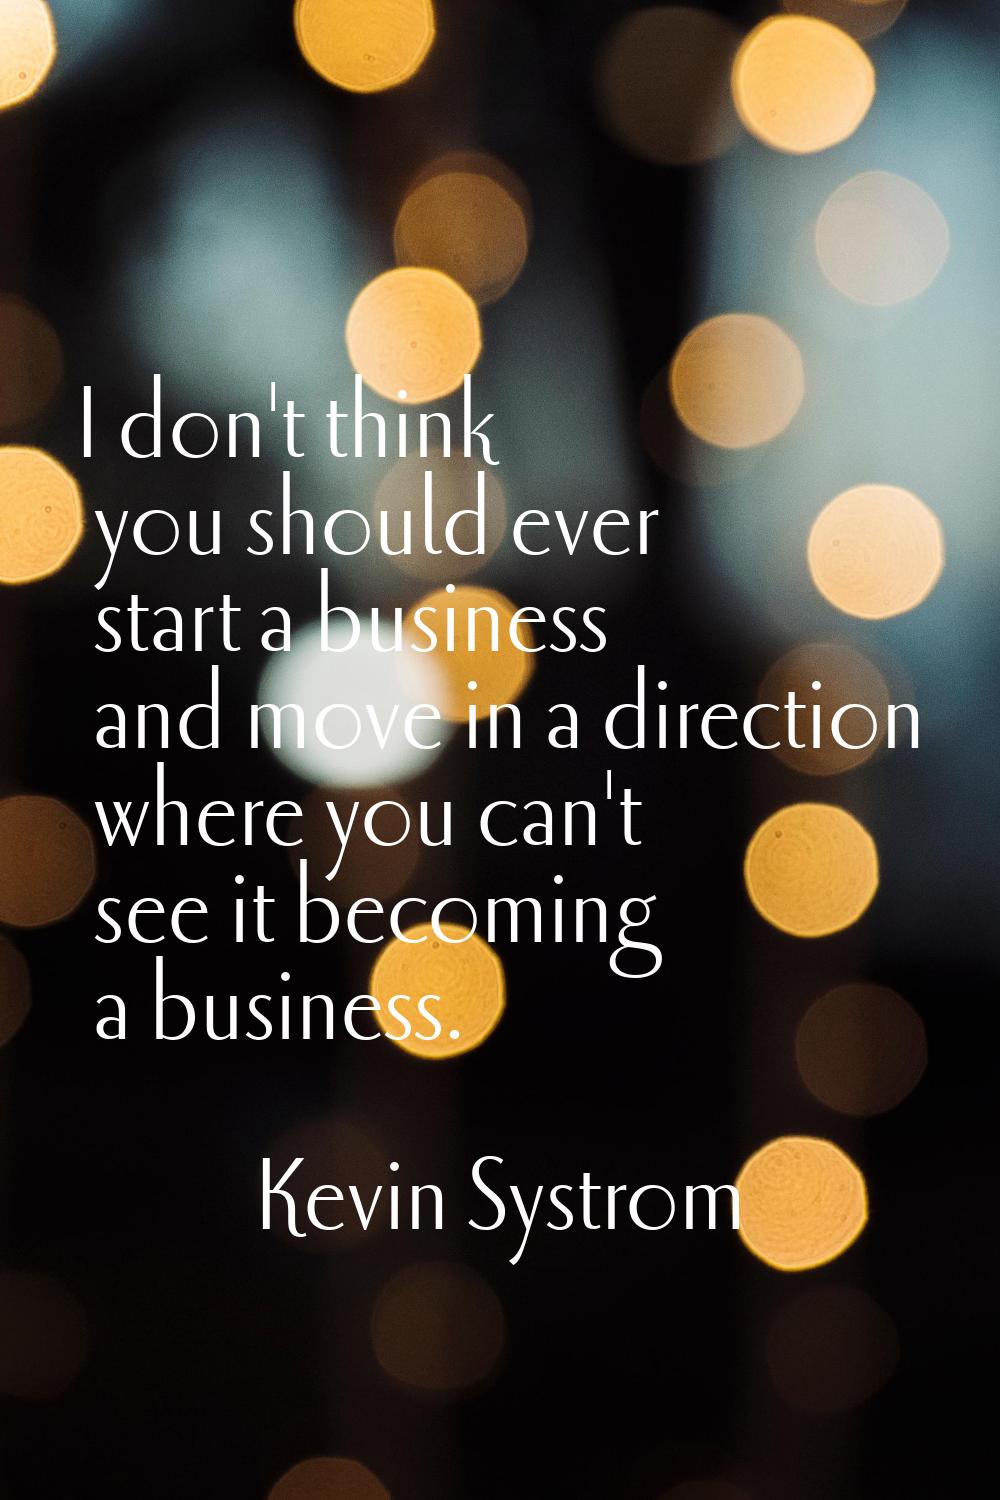 I don't think you should ever start a business and move in a direction where you can't see it becom